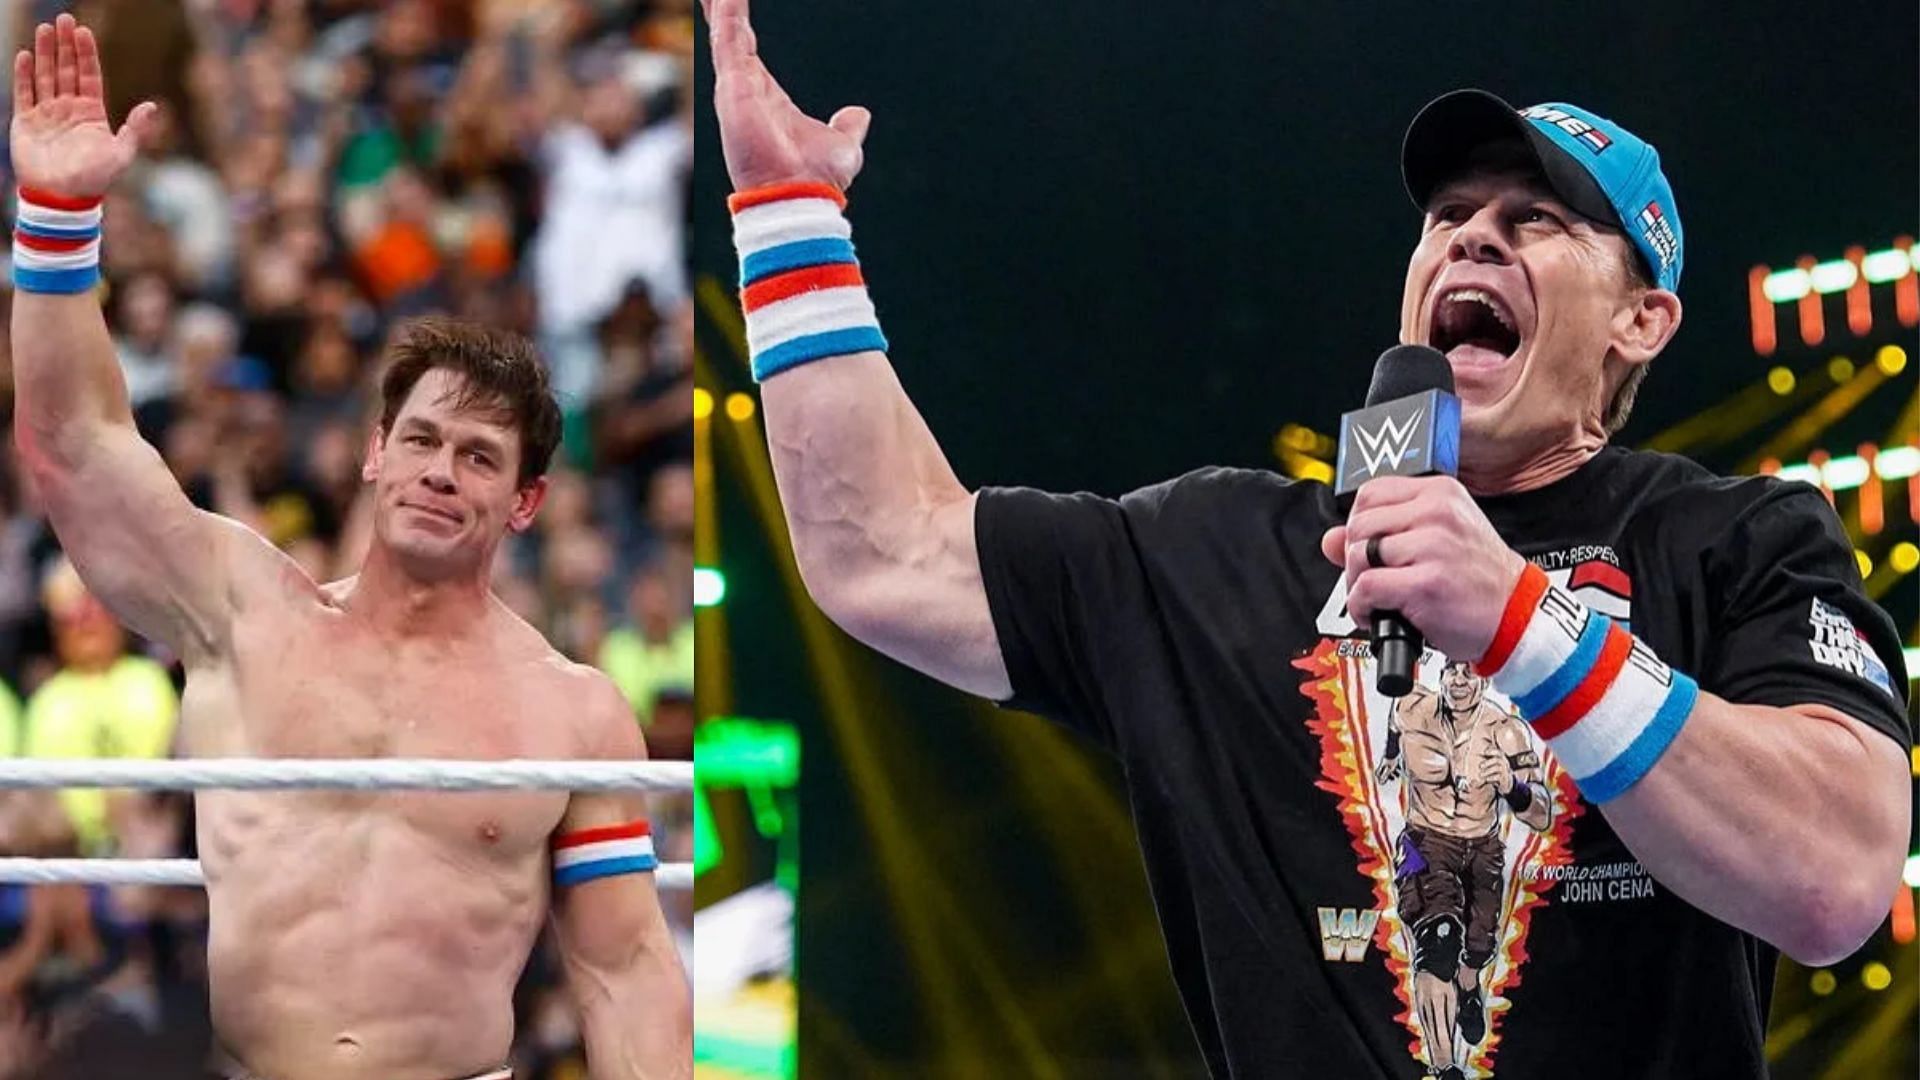 Could John Cena ruin another SummerSlam moment?